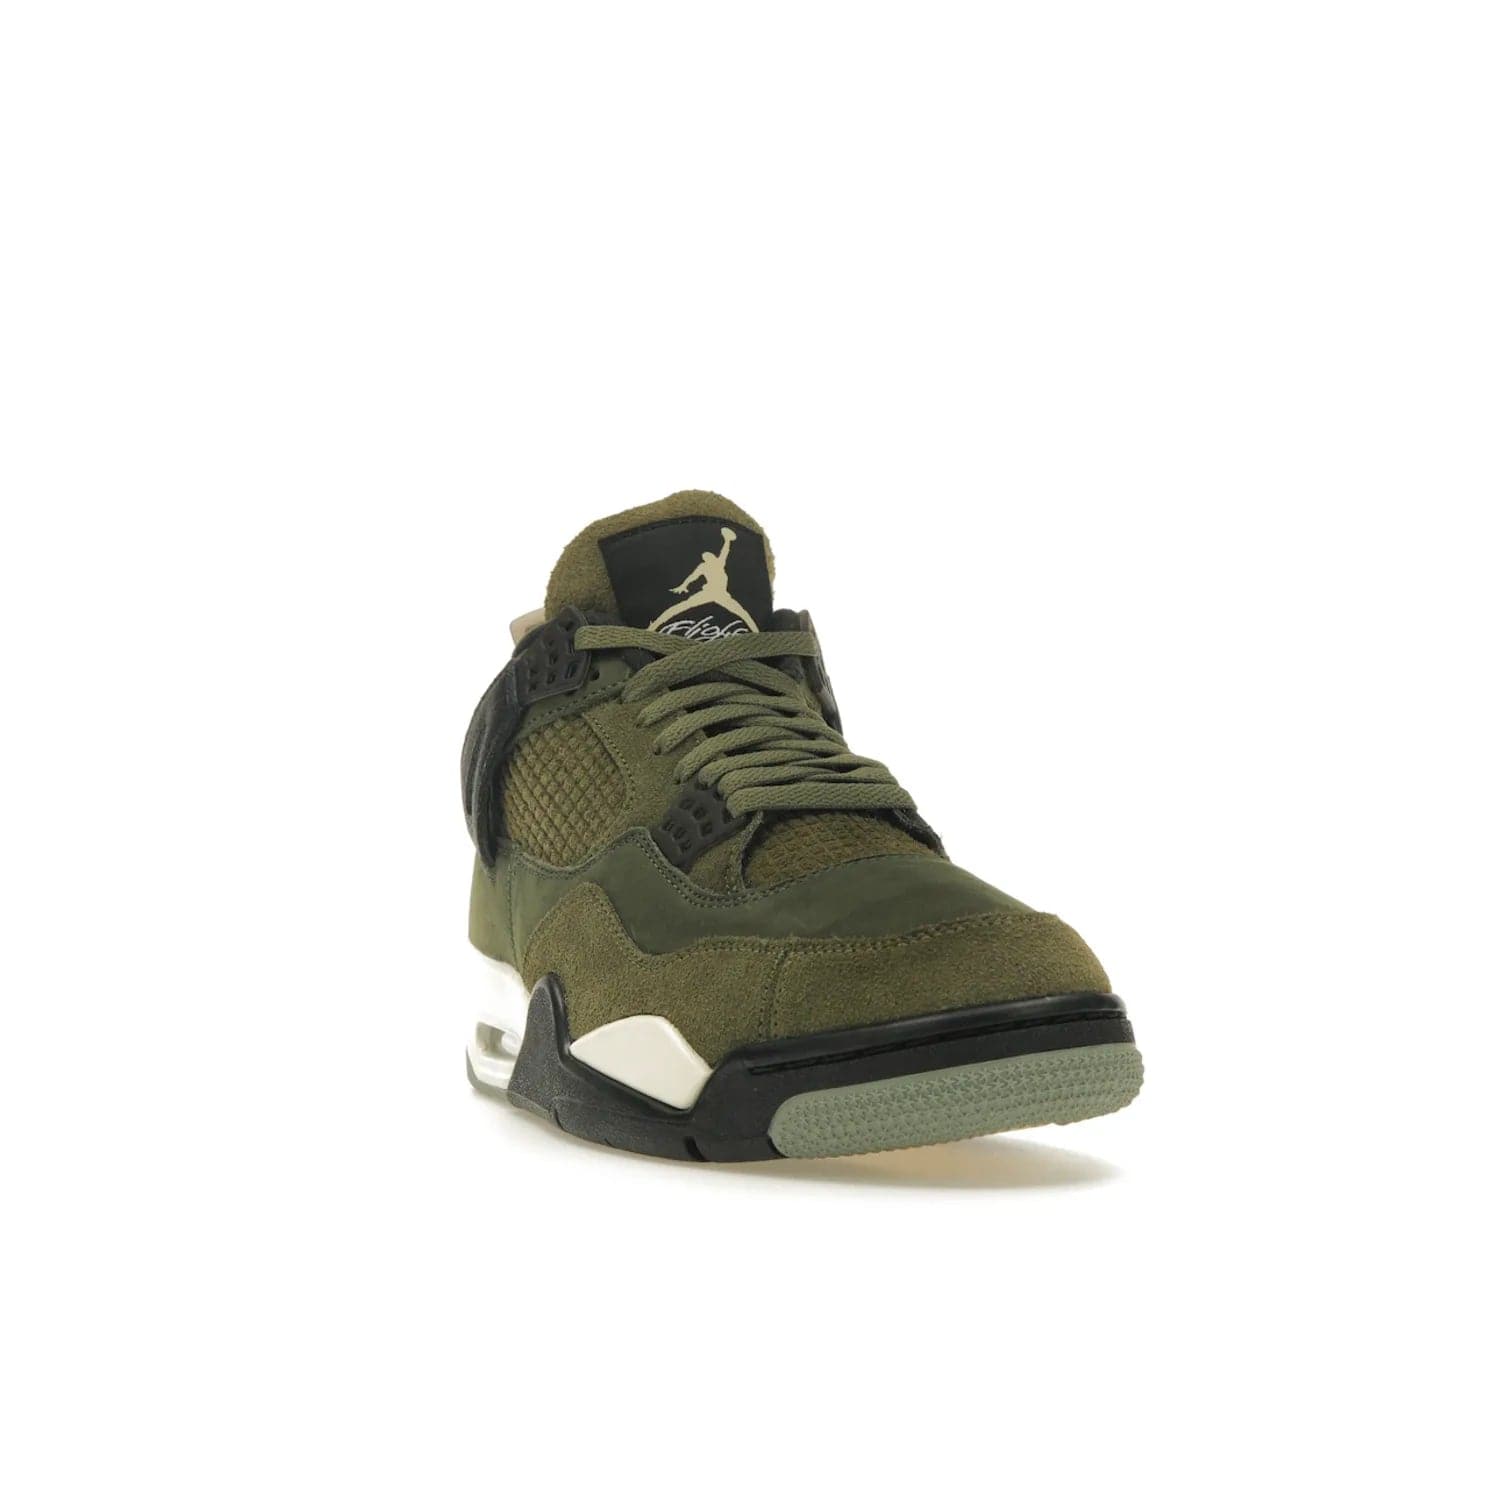 Jordan 4 Retro SE Craft Medium Olive - Image 8 - Only at www.BallersClubKickz.com - Grab the Jordan 4 Retro SE Crafts for a unique style. Combines Medium Olive, Pale Vanilla, Khaki, Black and Sail, with same classic shape, cushioning, and rubber outsole. Available on November 18th!